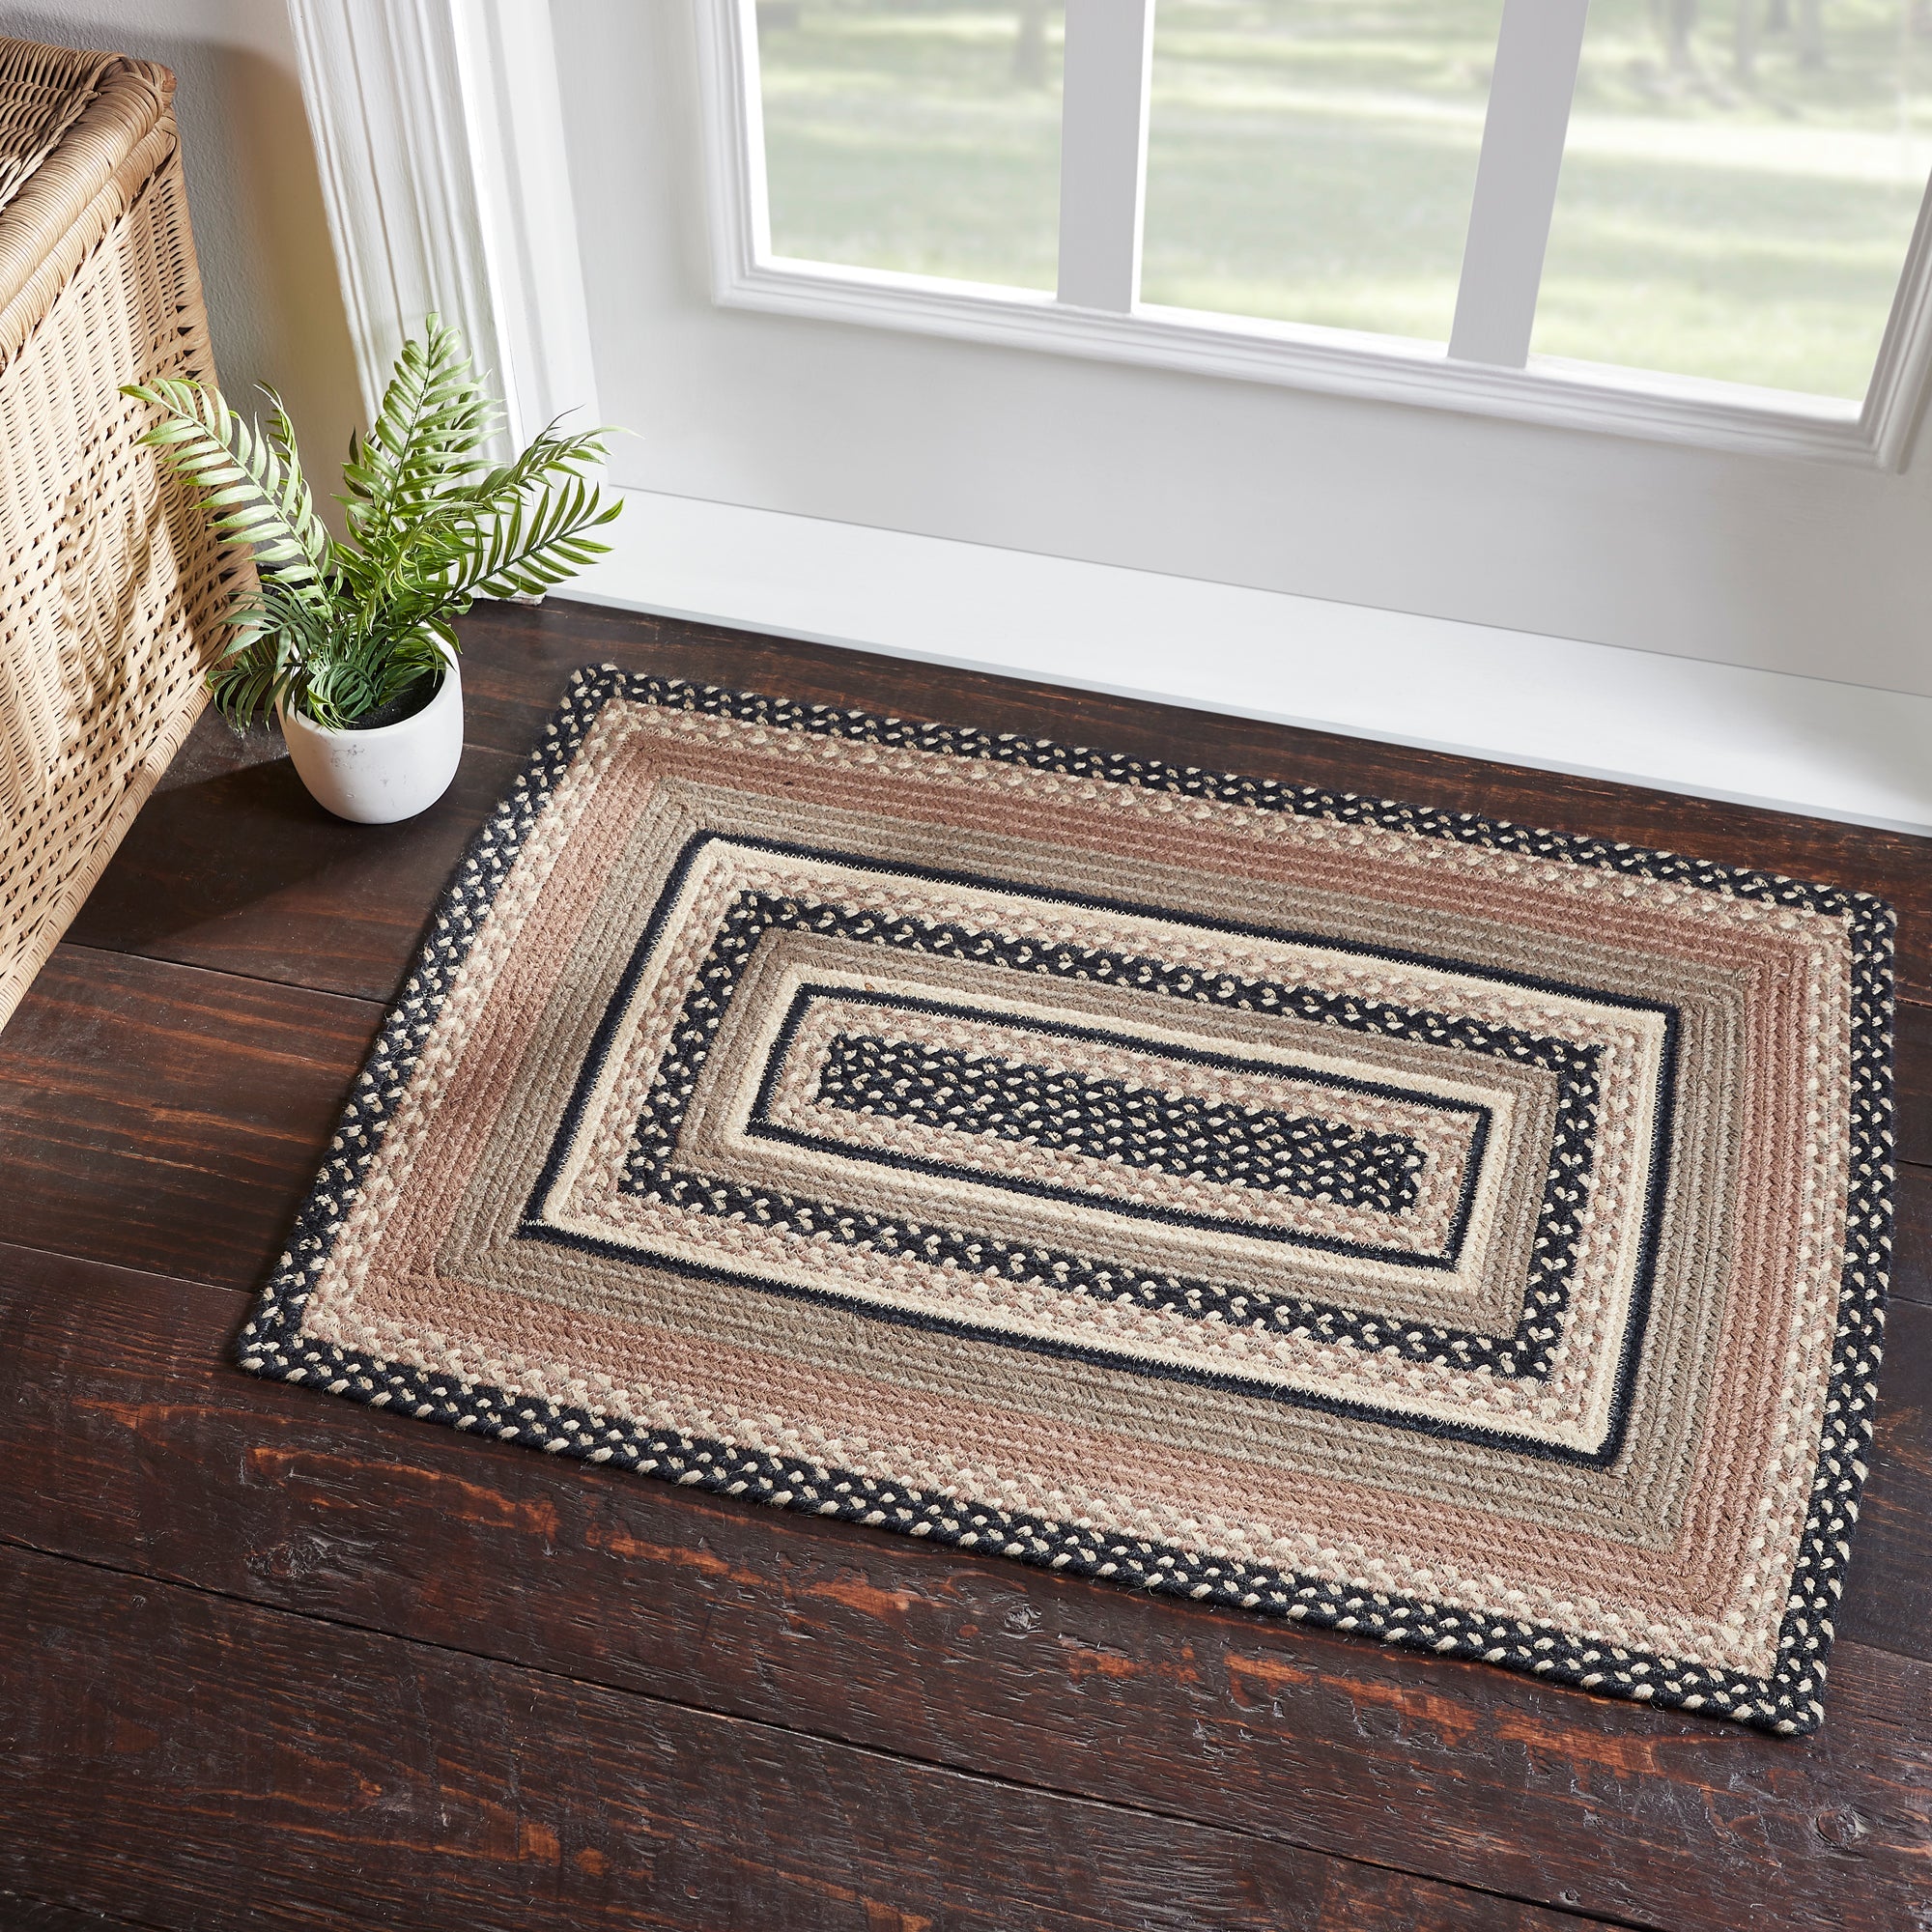 Sawyer Mill Charcoal Creme Jute Braided Rug Rect w/ Pad 2'x3' VHC Brands